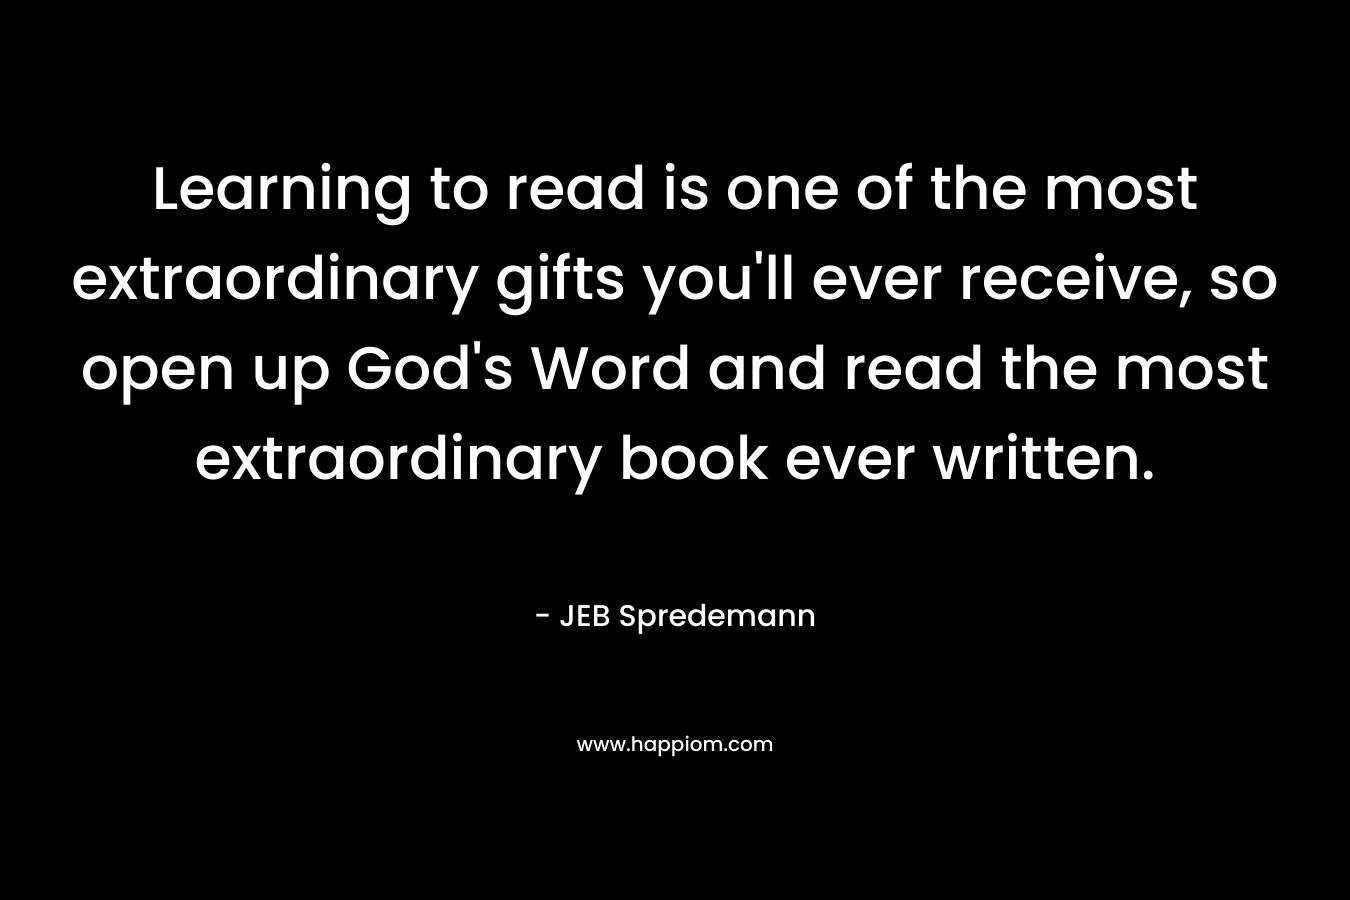 Learning to read is one of the most extraordinary gifts you'll ever receive, so open up God's Word and read the most extraordinary book ever written.